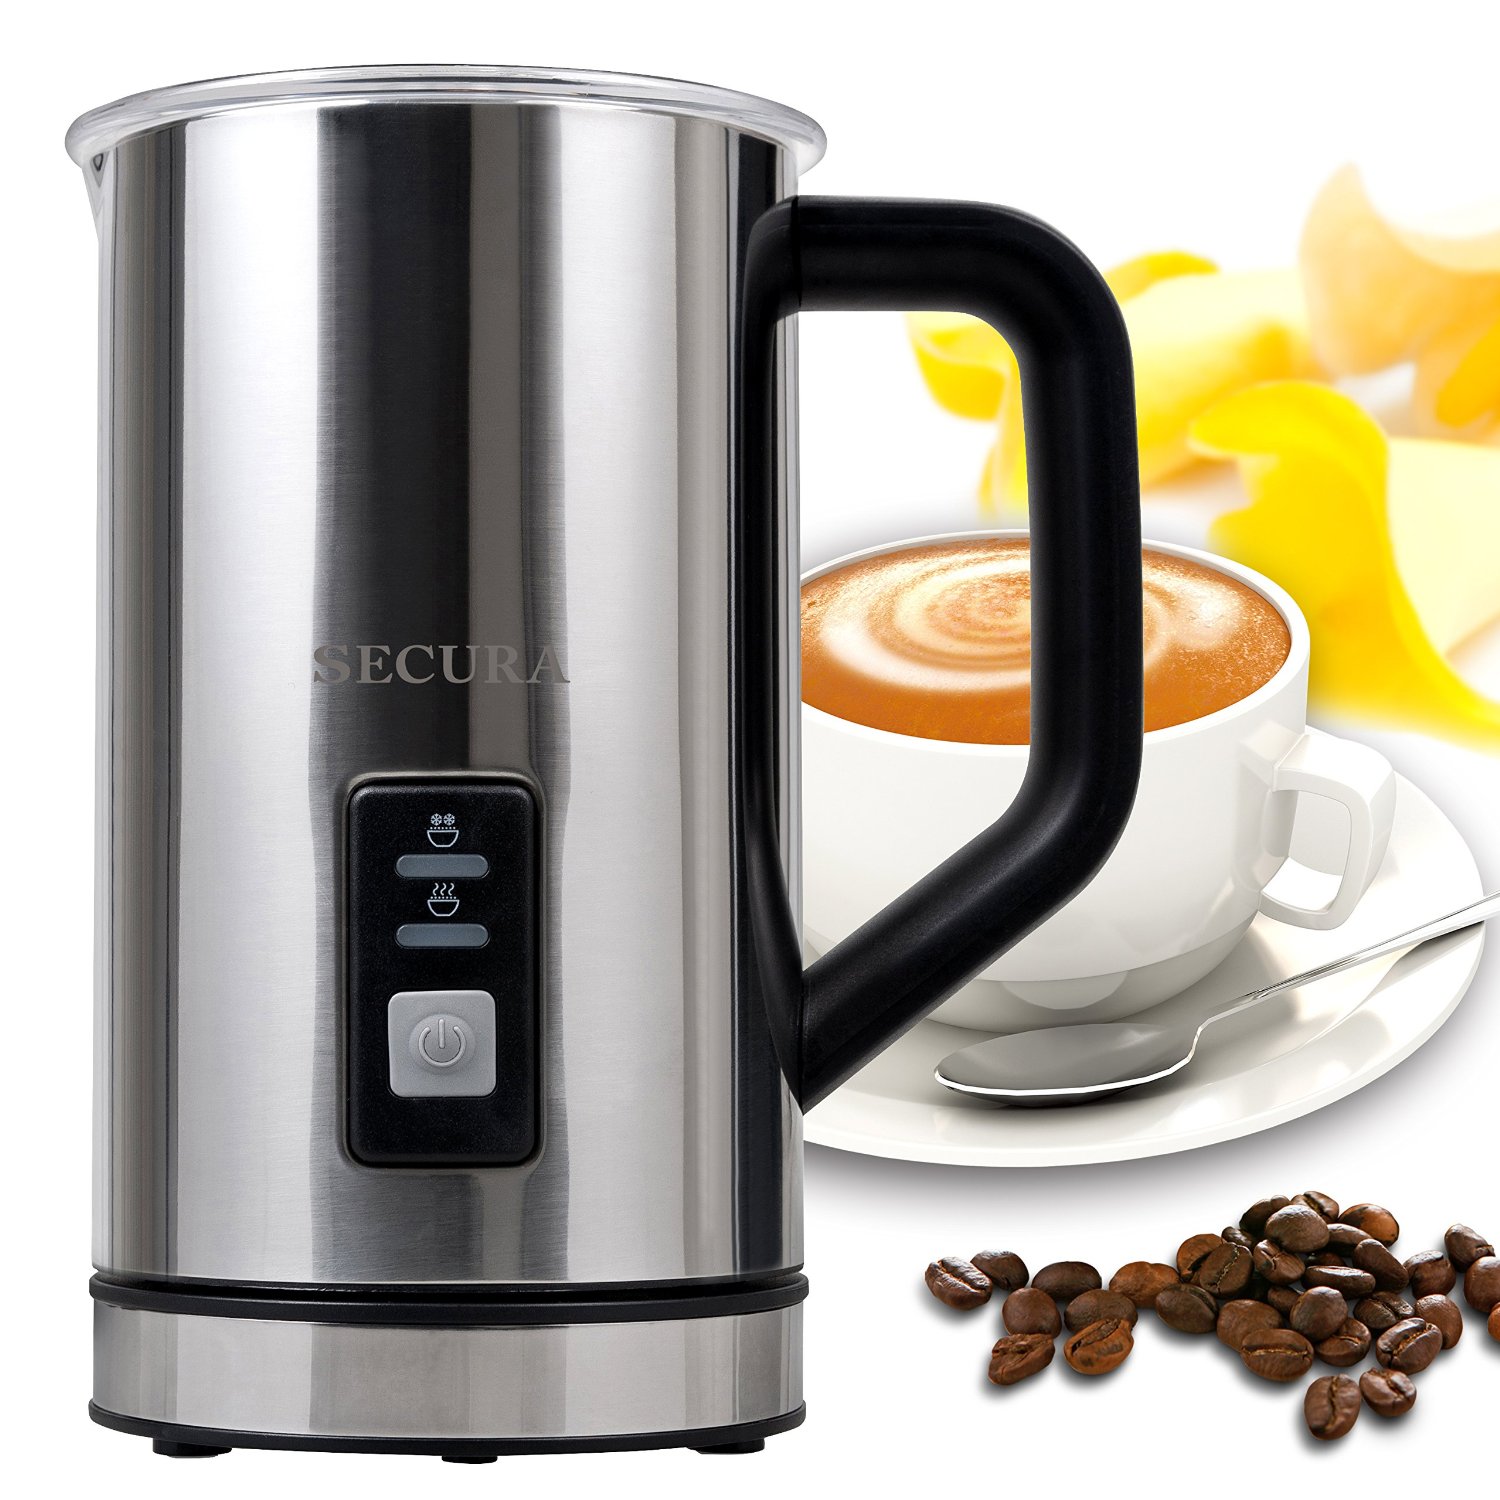 Secura MMF-015 Automatic Electric Milk Frother and Warmer 250ml - The